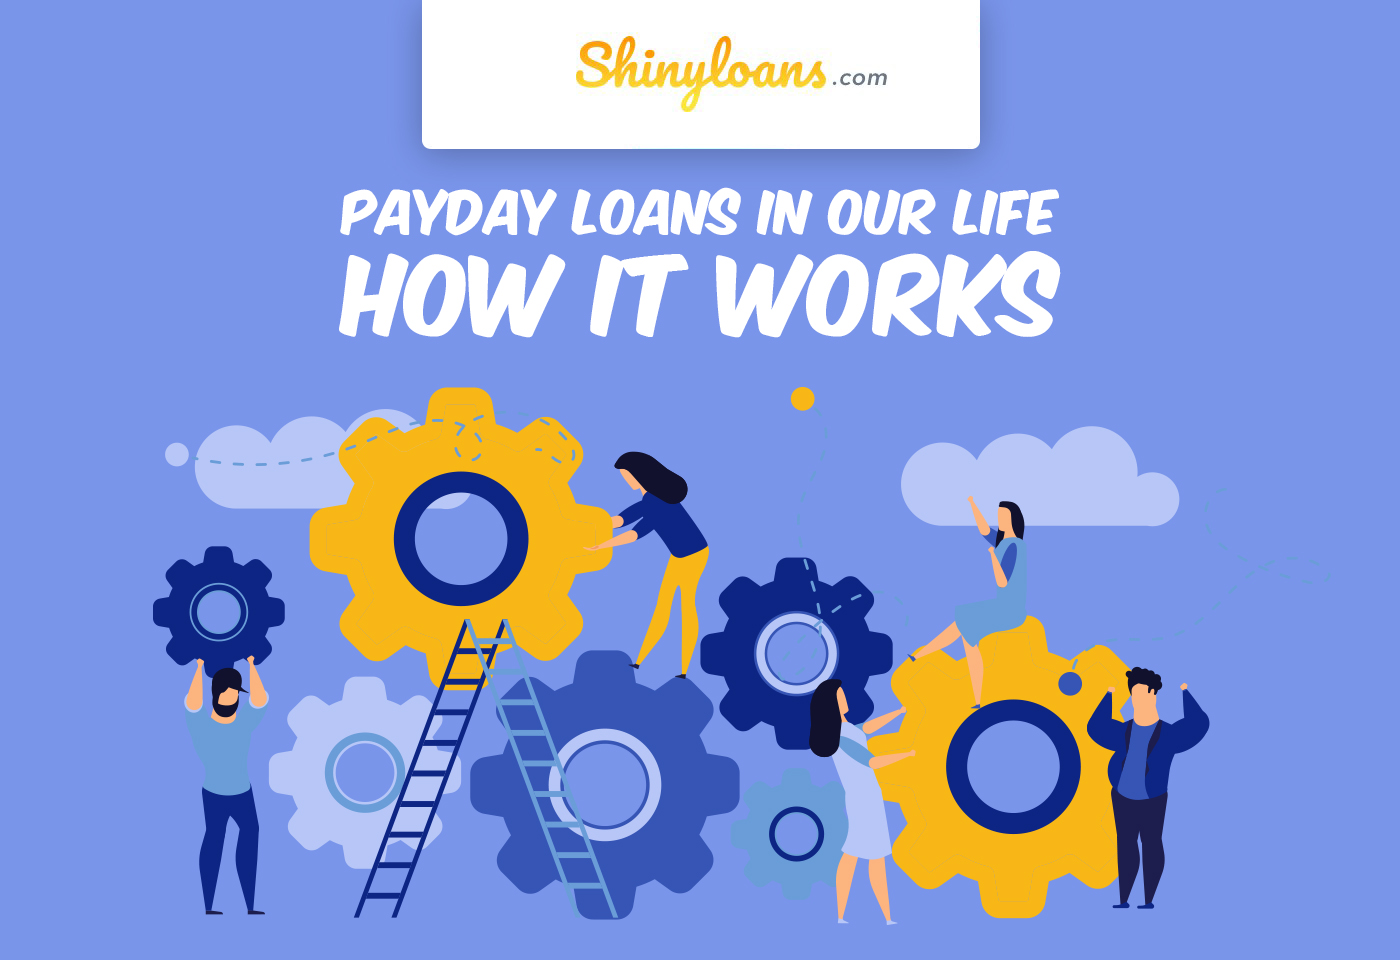 Payday Loans In Our Life - How It Works